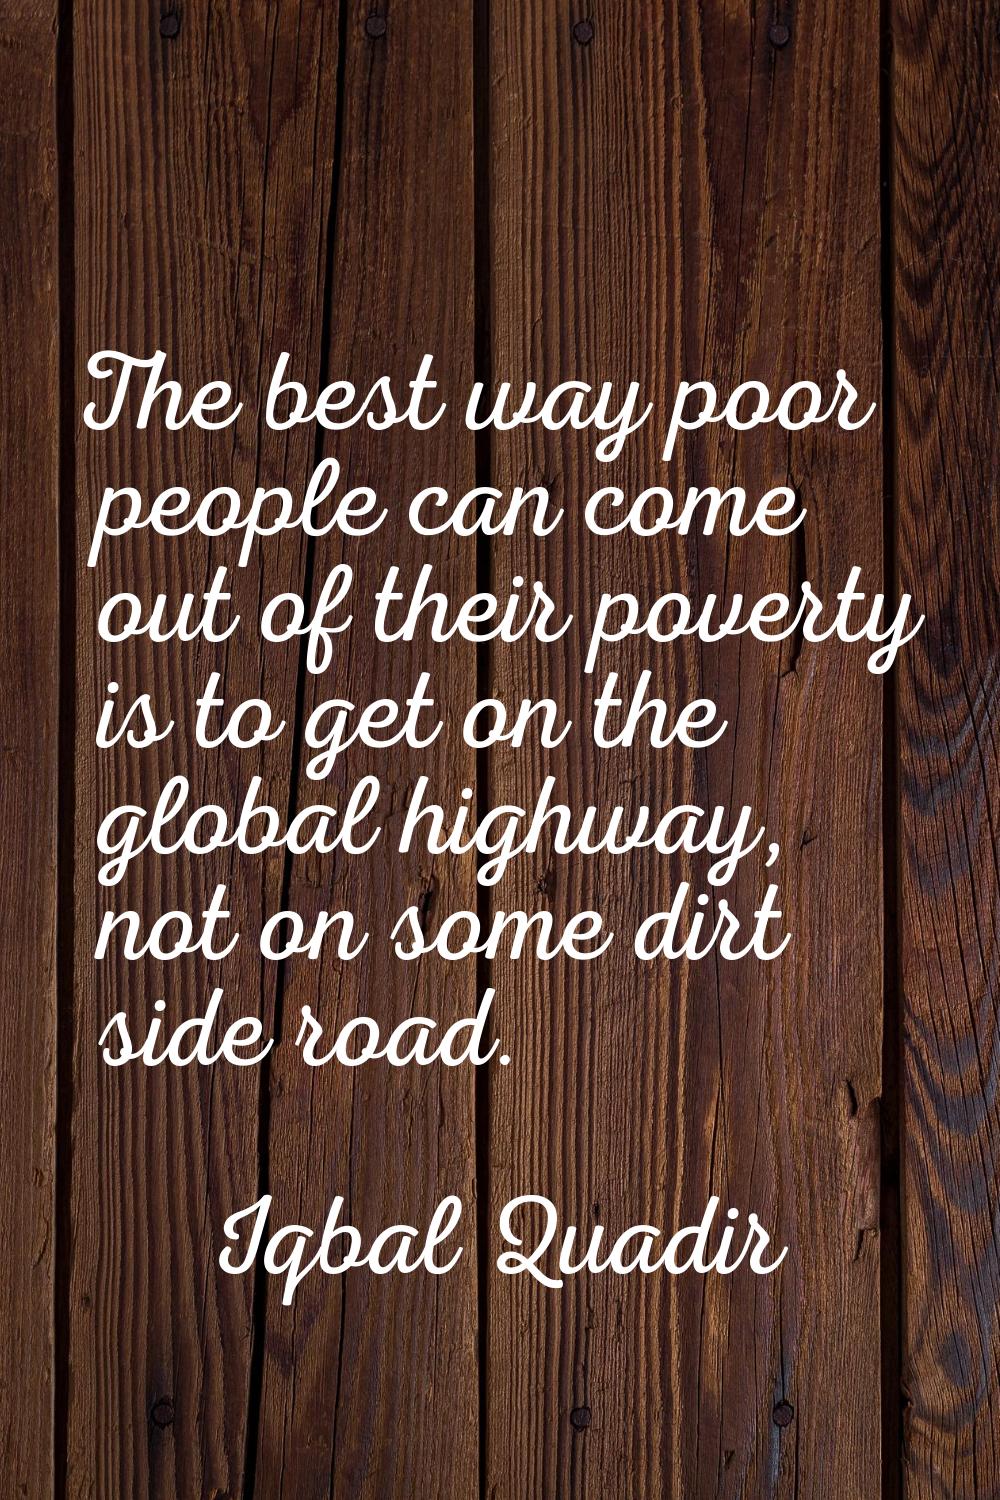 The best way poor people can come out of their poverty is to get on the global highway, not on some